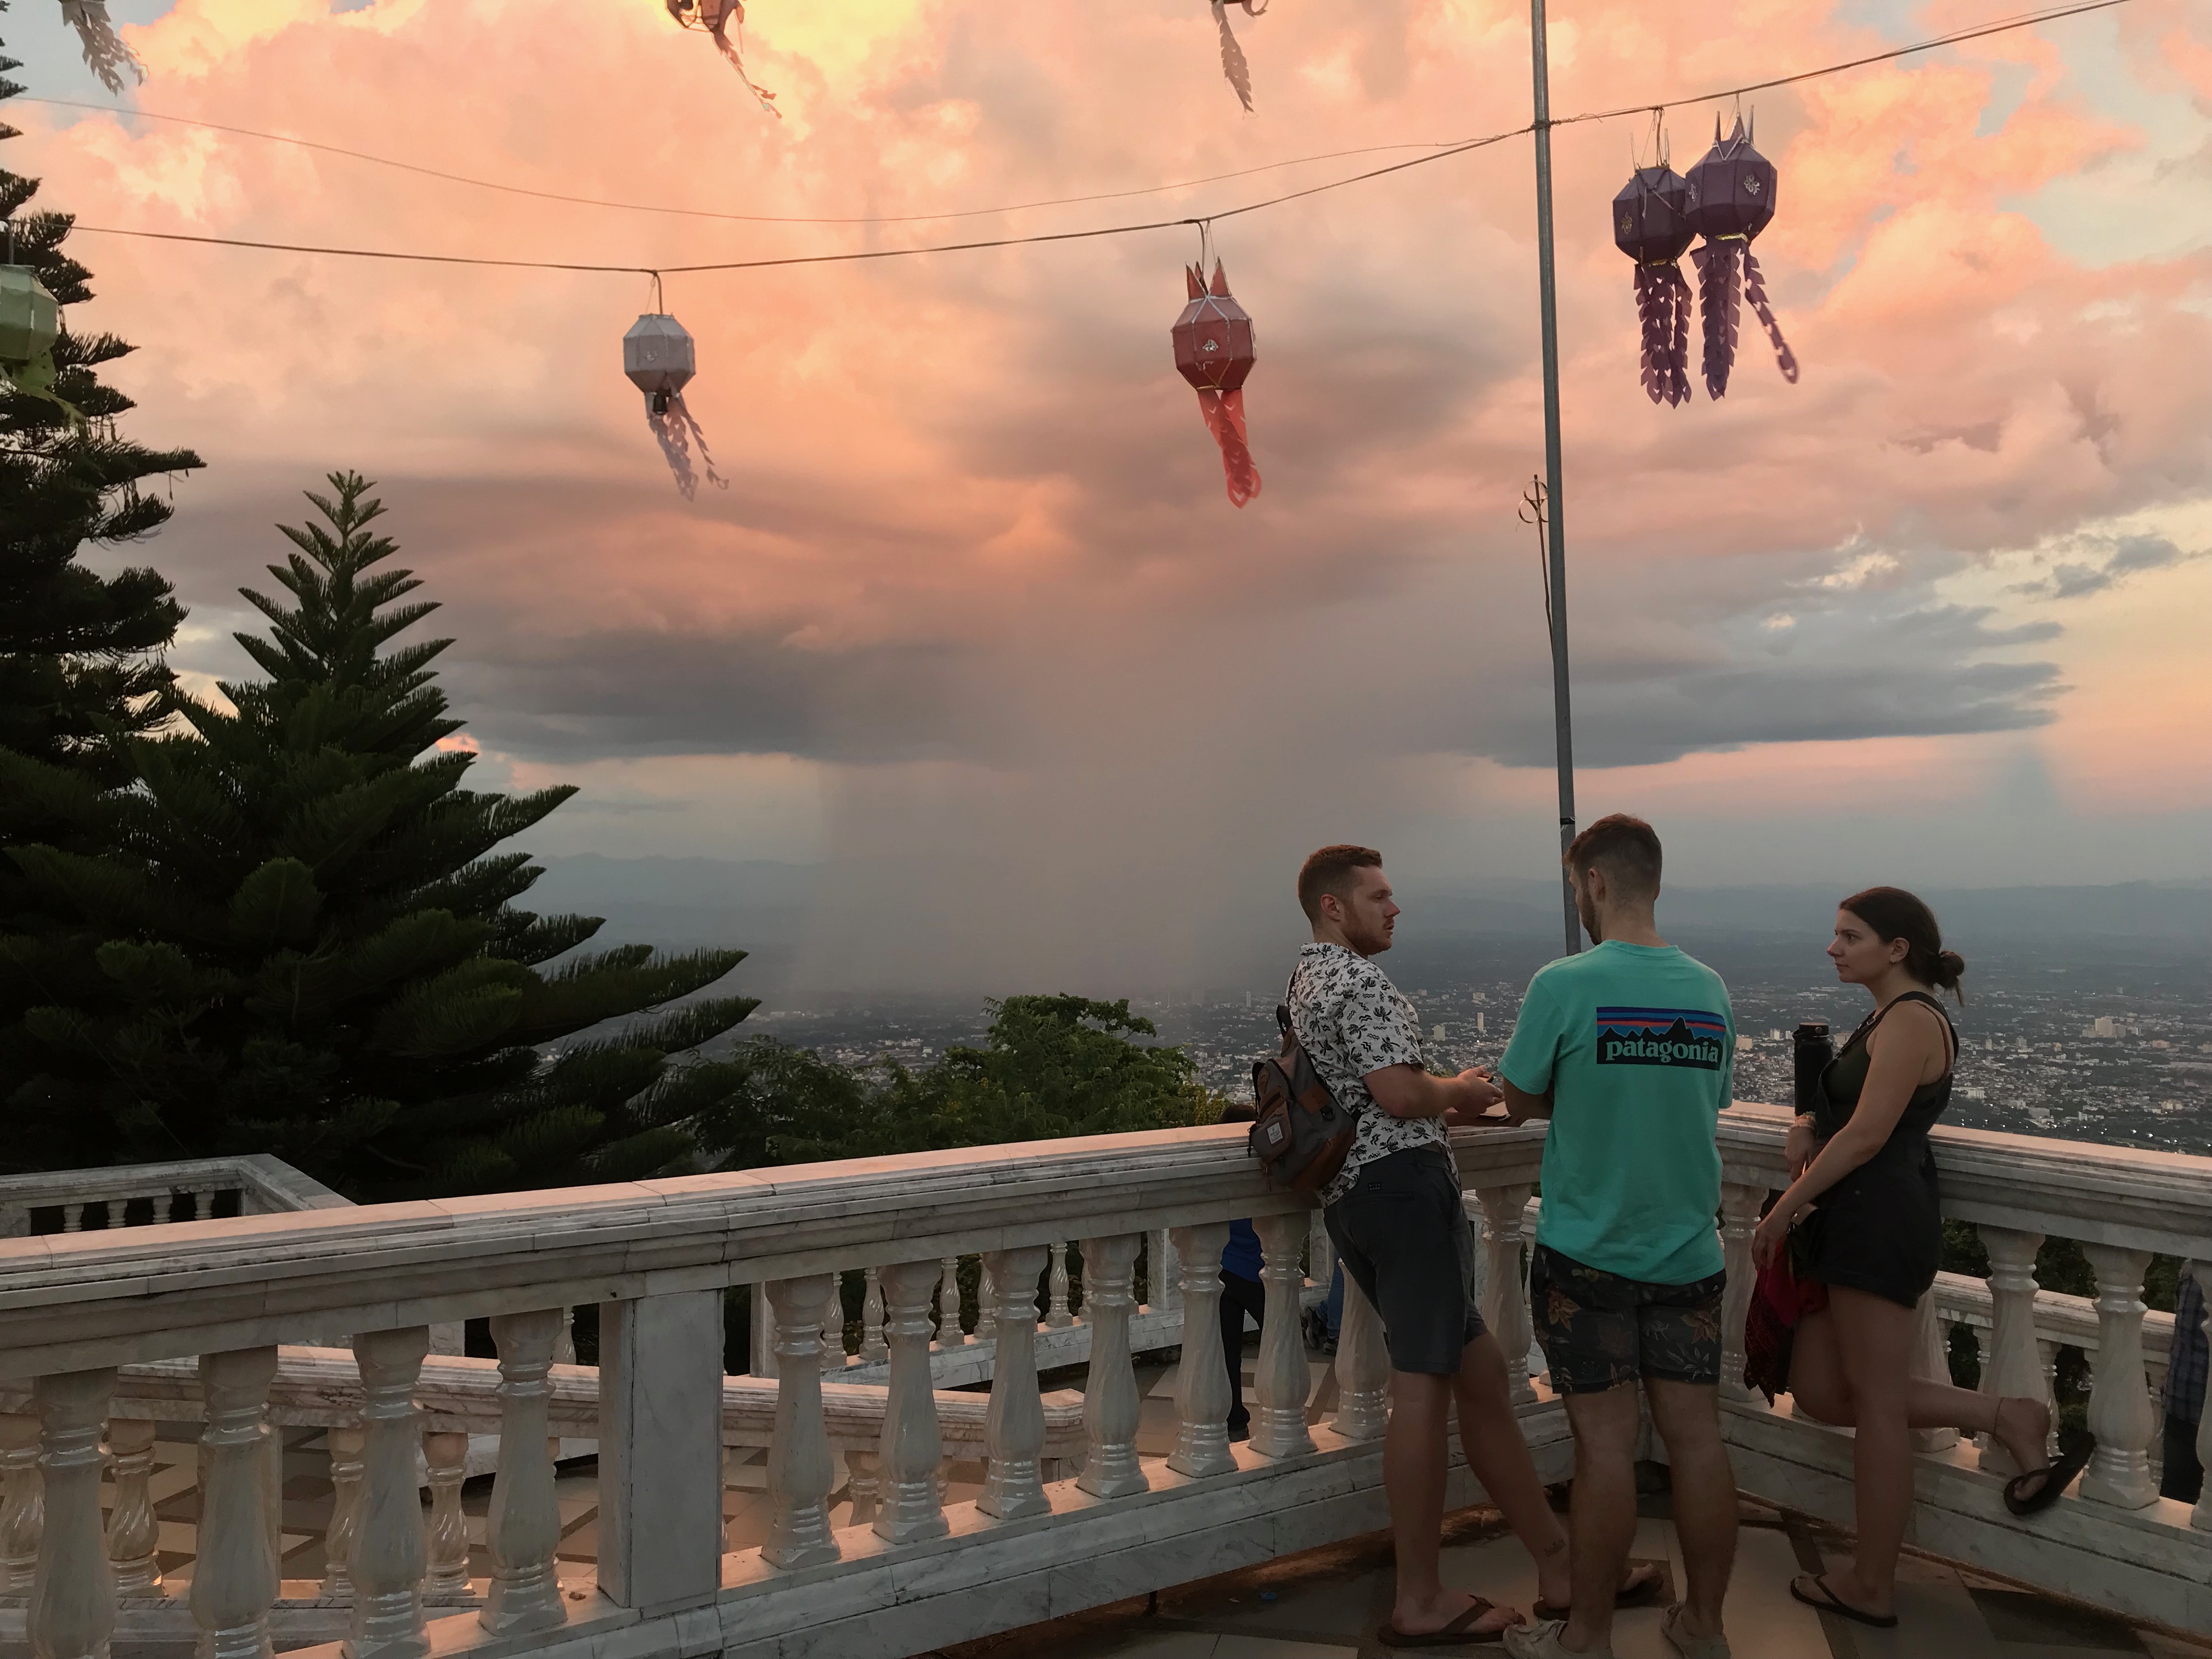 friends talking on a balcony at sunset